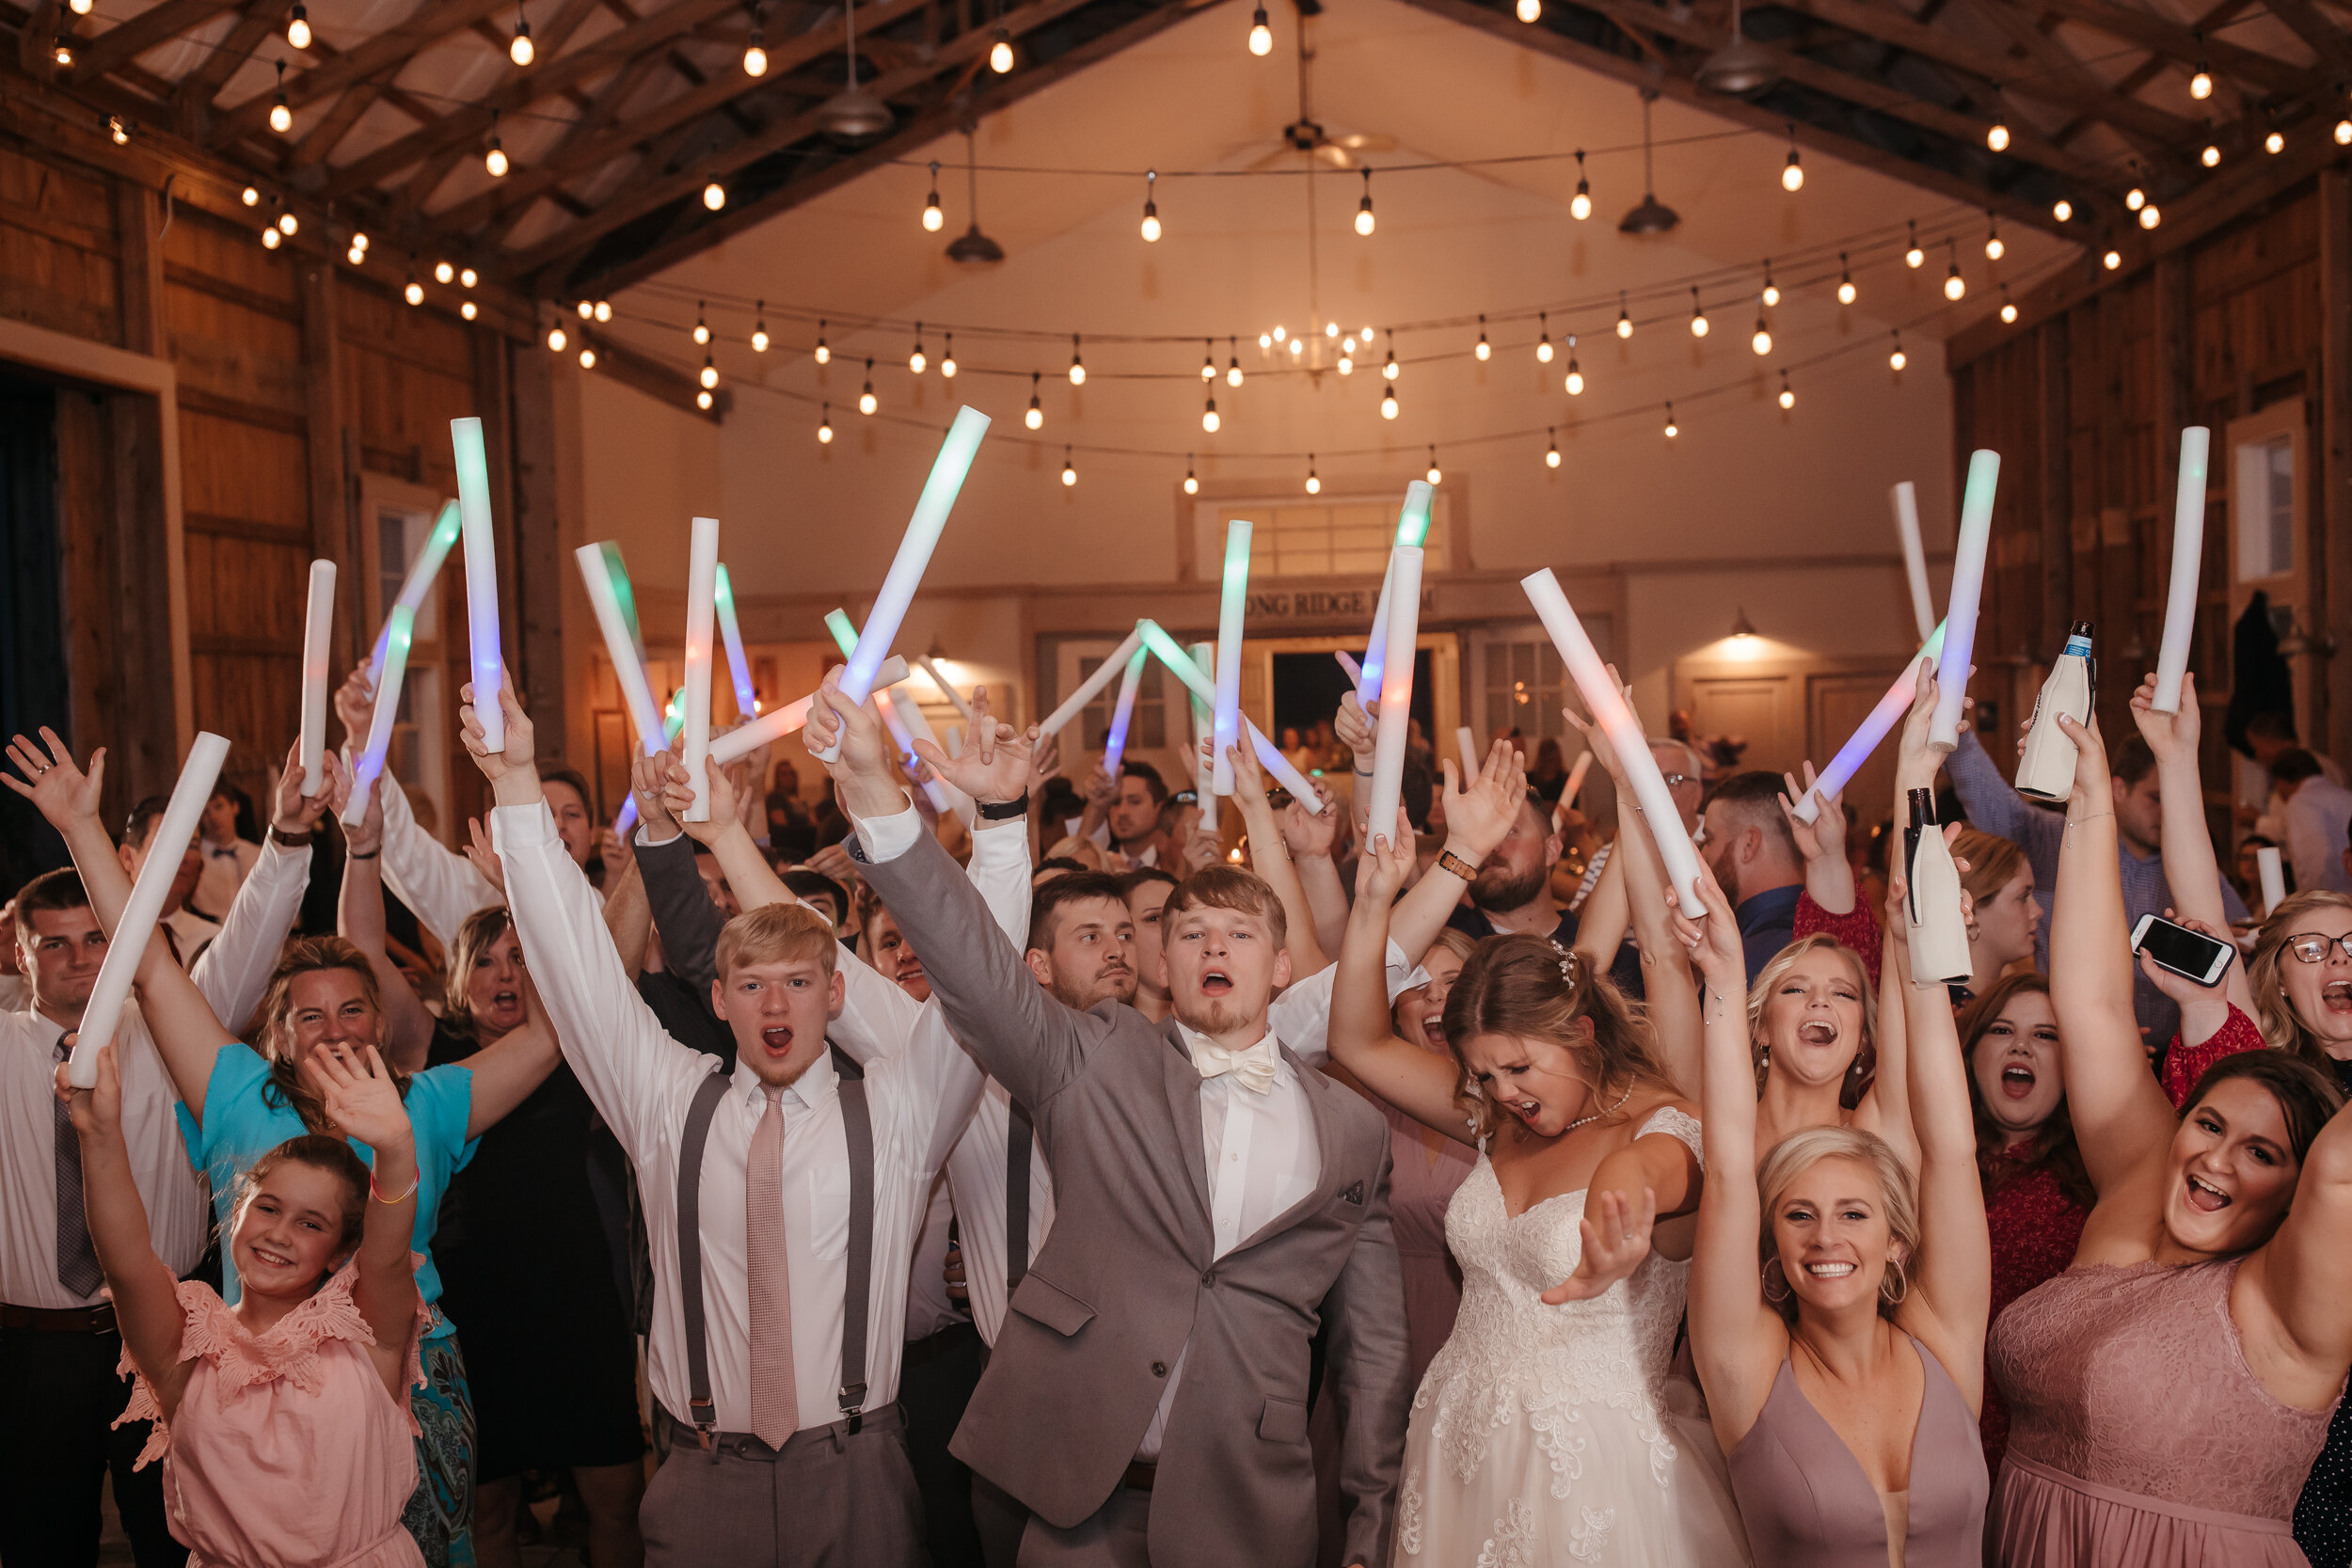 Add some fun details to your reception with glow sticks